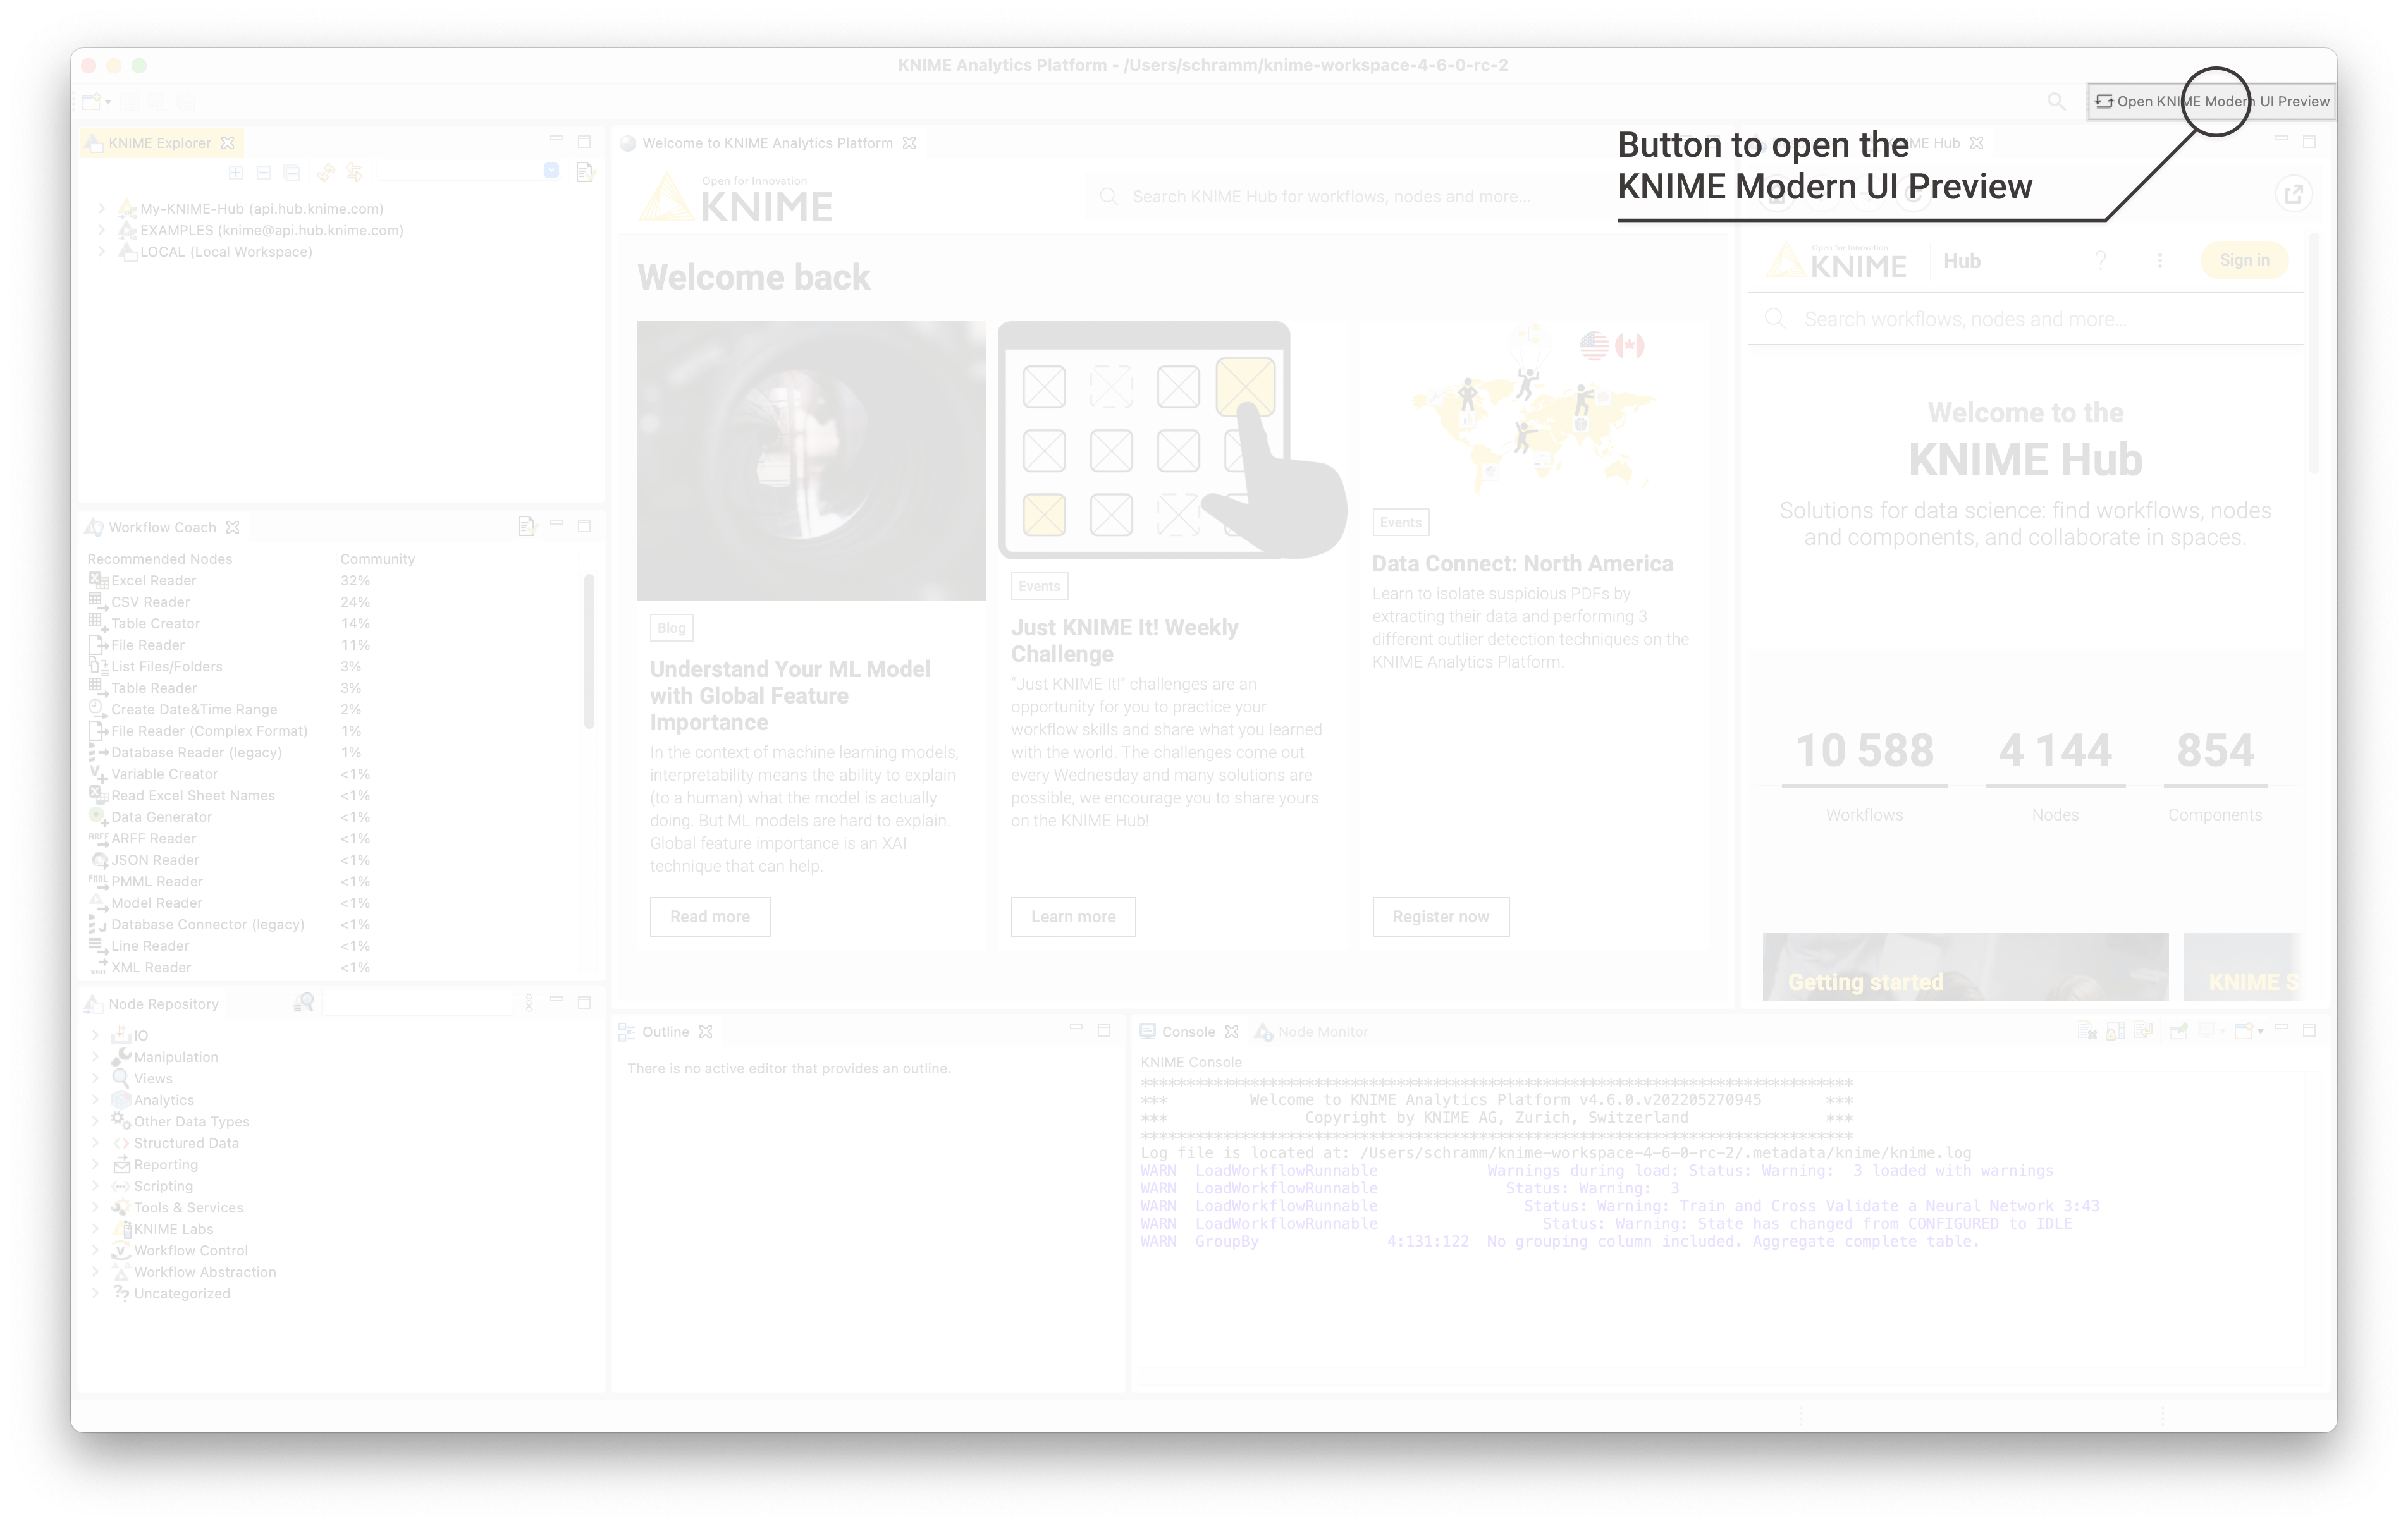 01 switch perspective to knime modern ui preview